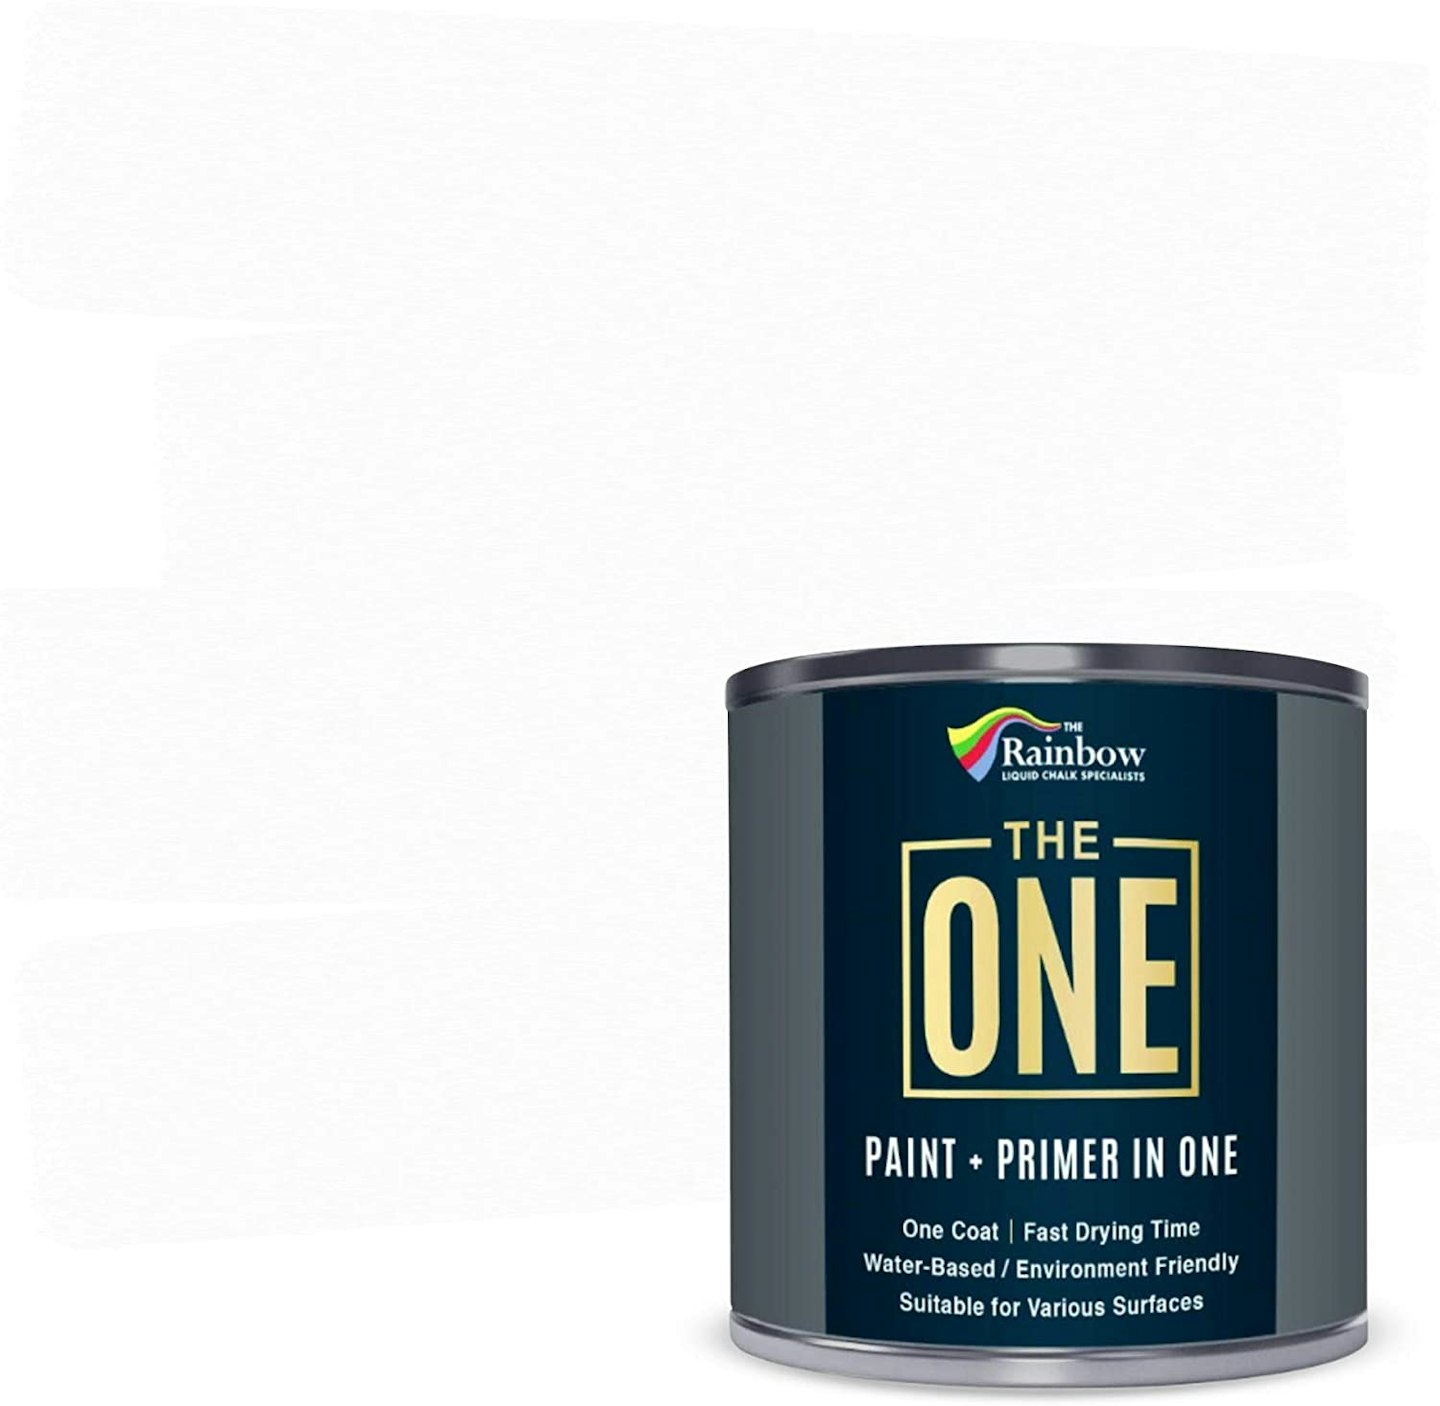 A tin of The One tile paint